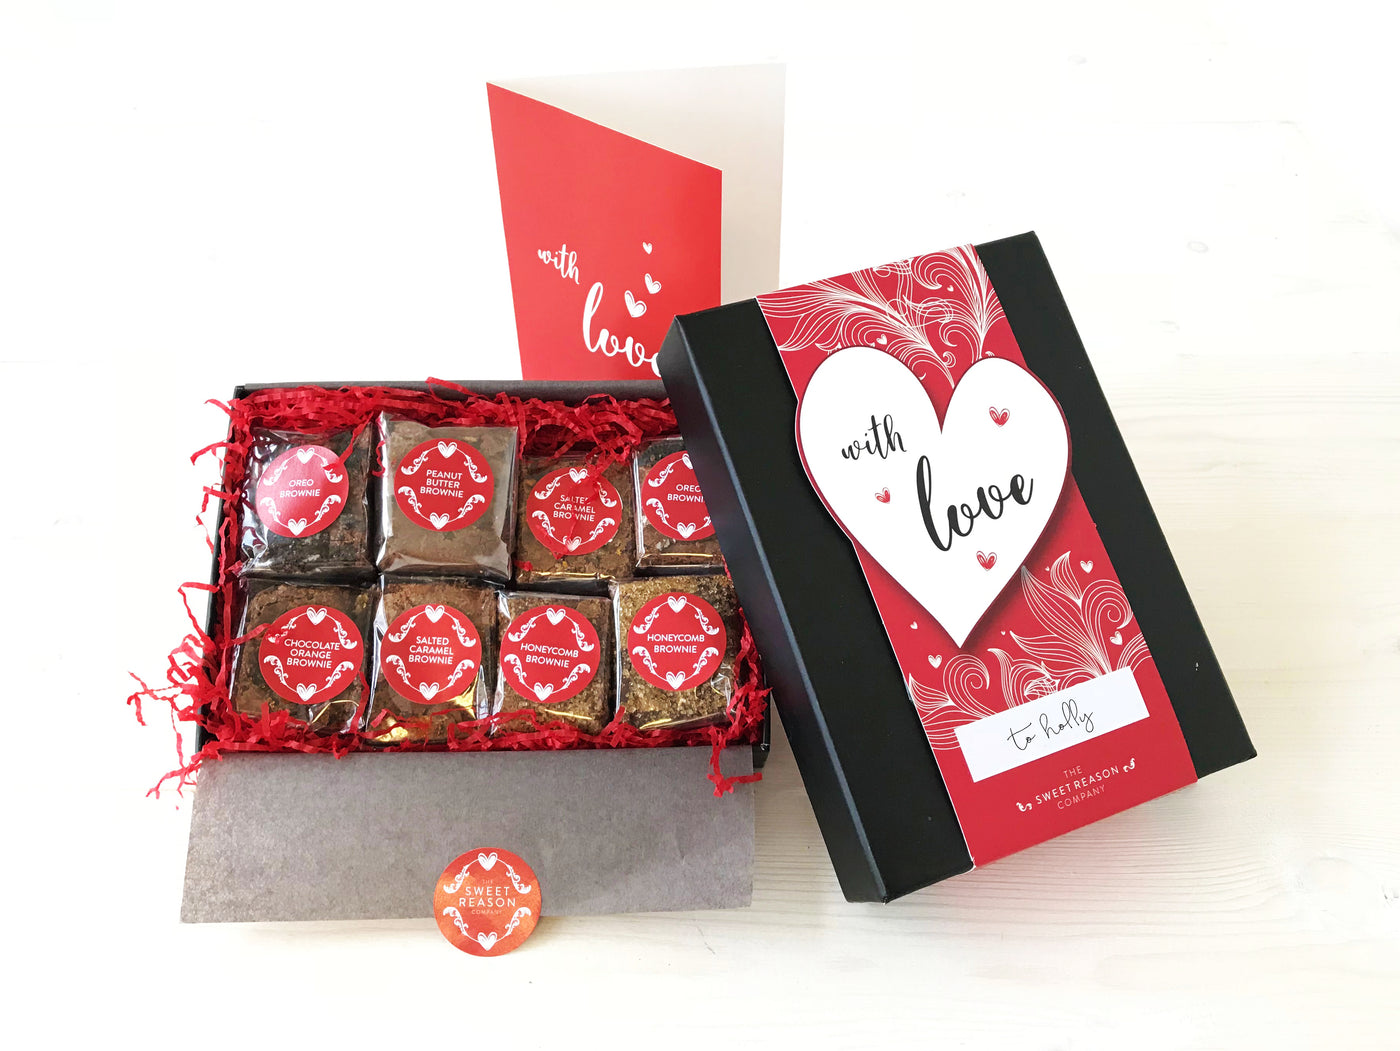 With Love' Luxury Brownie Gift for 6 Months